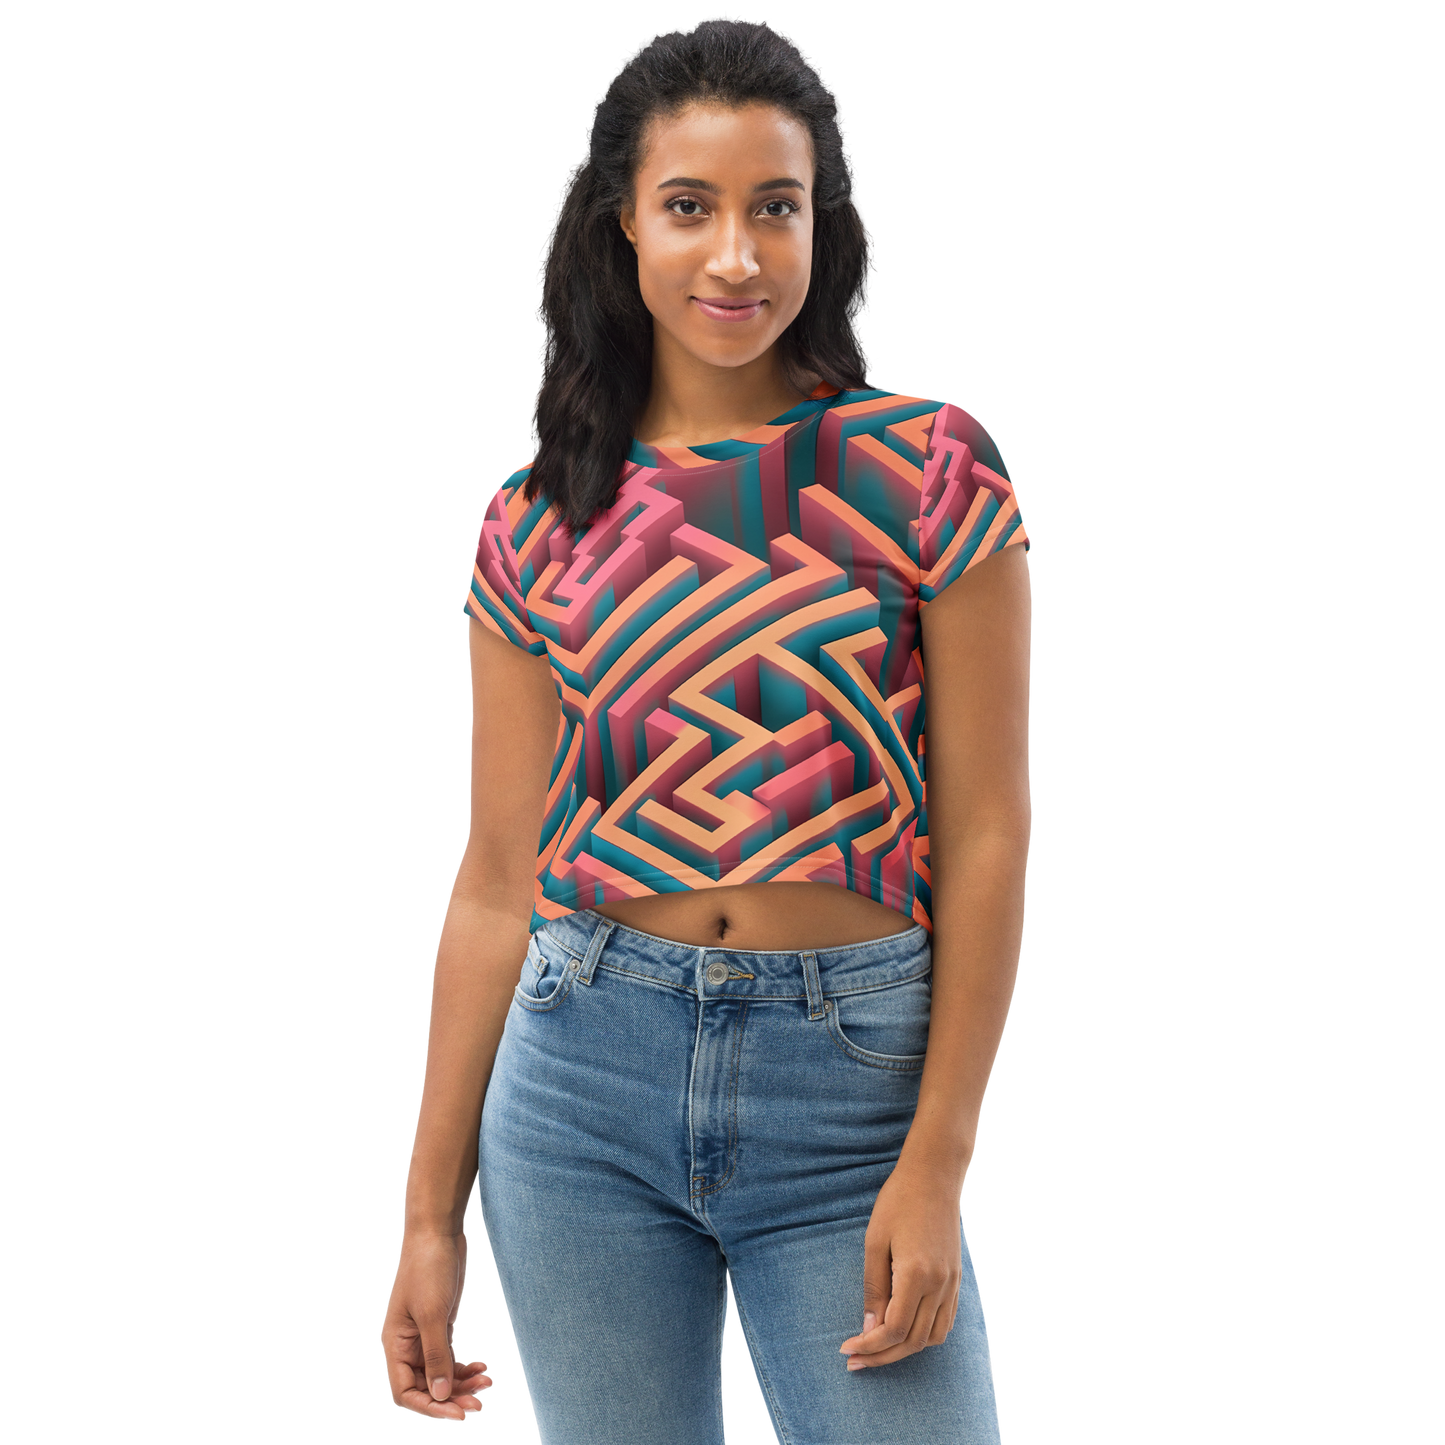 3D Maze Illusion | 3D Patterns | All-Over Print Crop Tee - #1